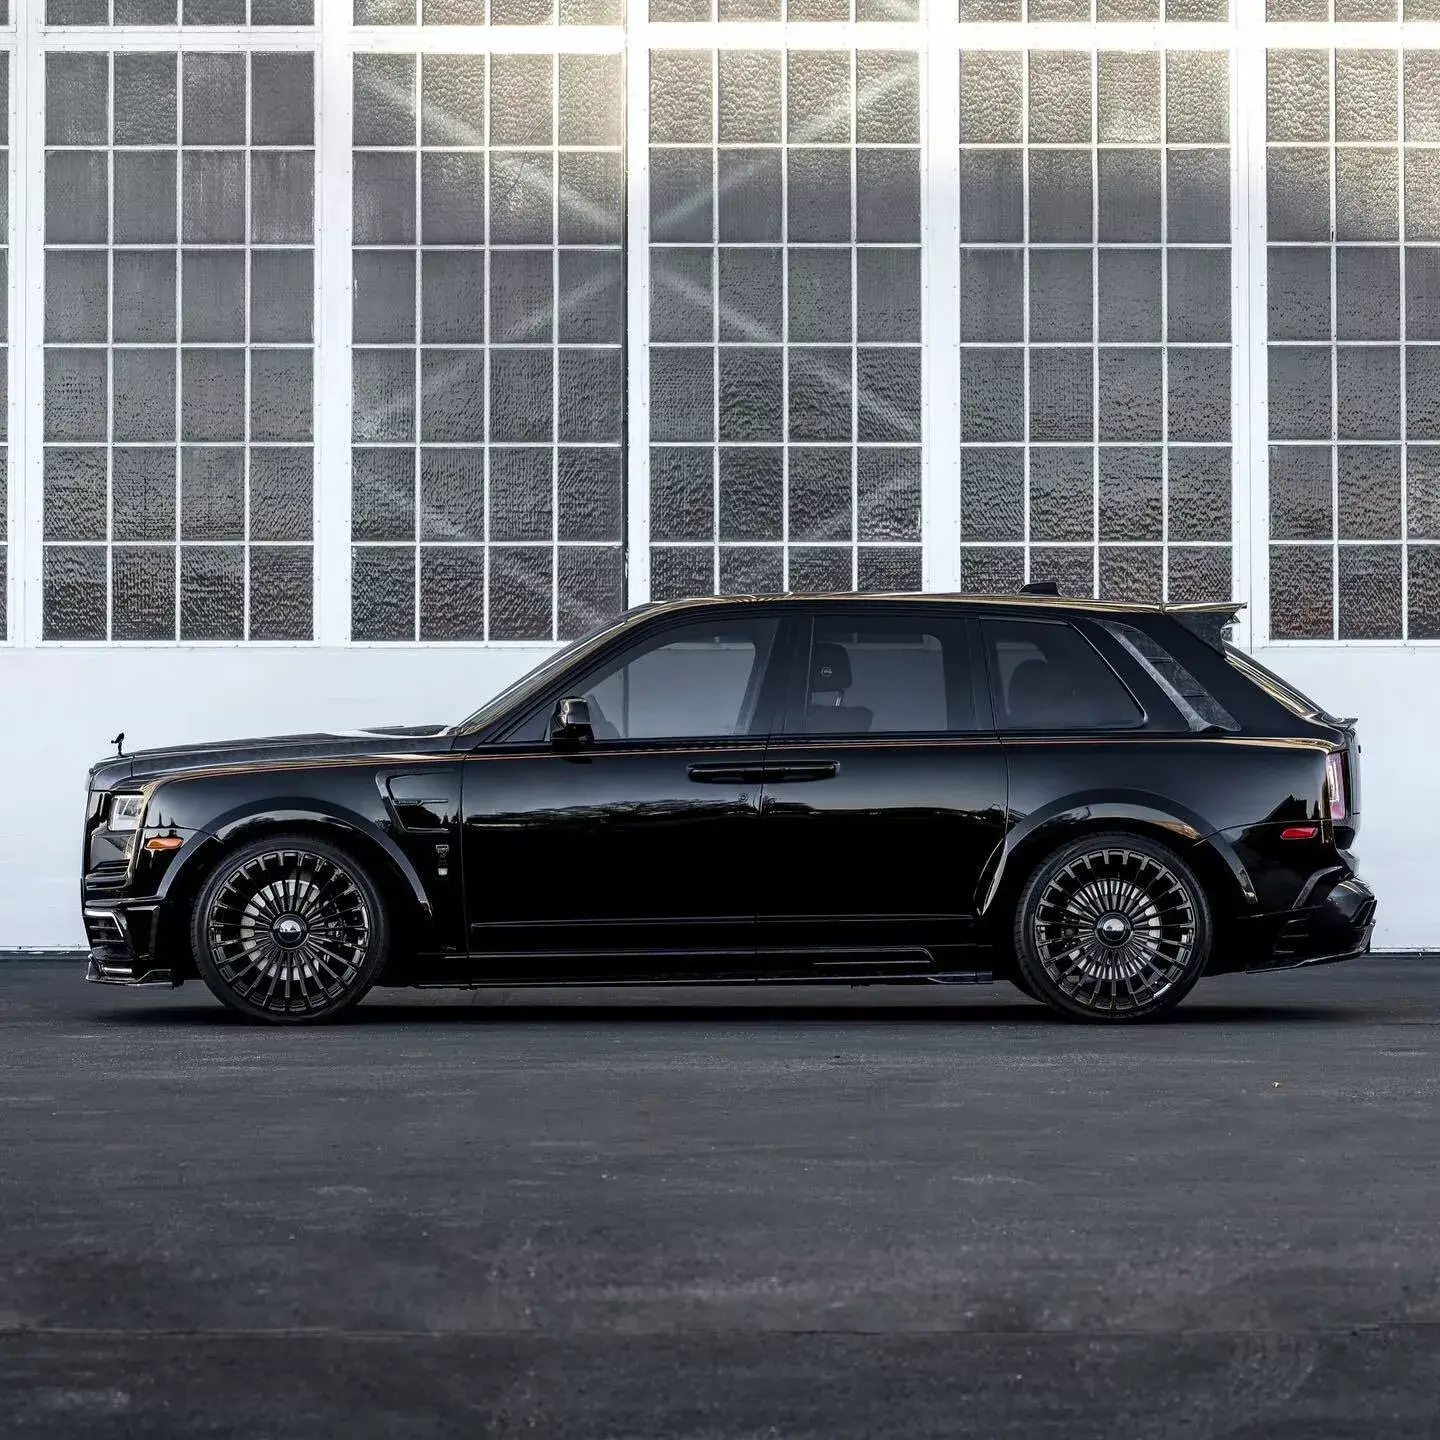 Atelier Mansory built a unique Rolls-Royce Cullinan for the best DJ in the world